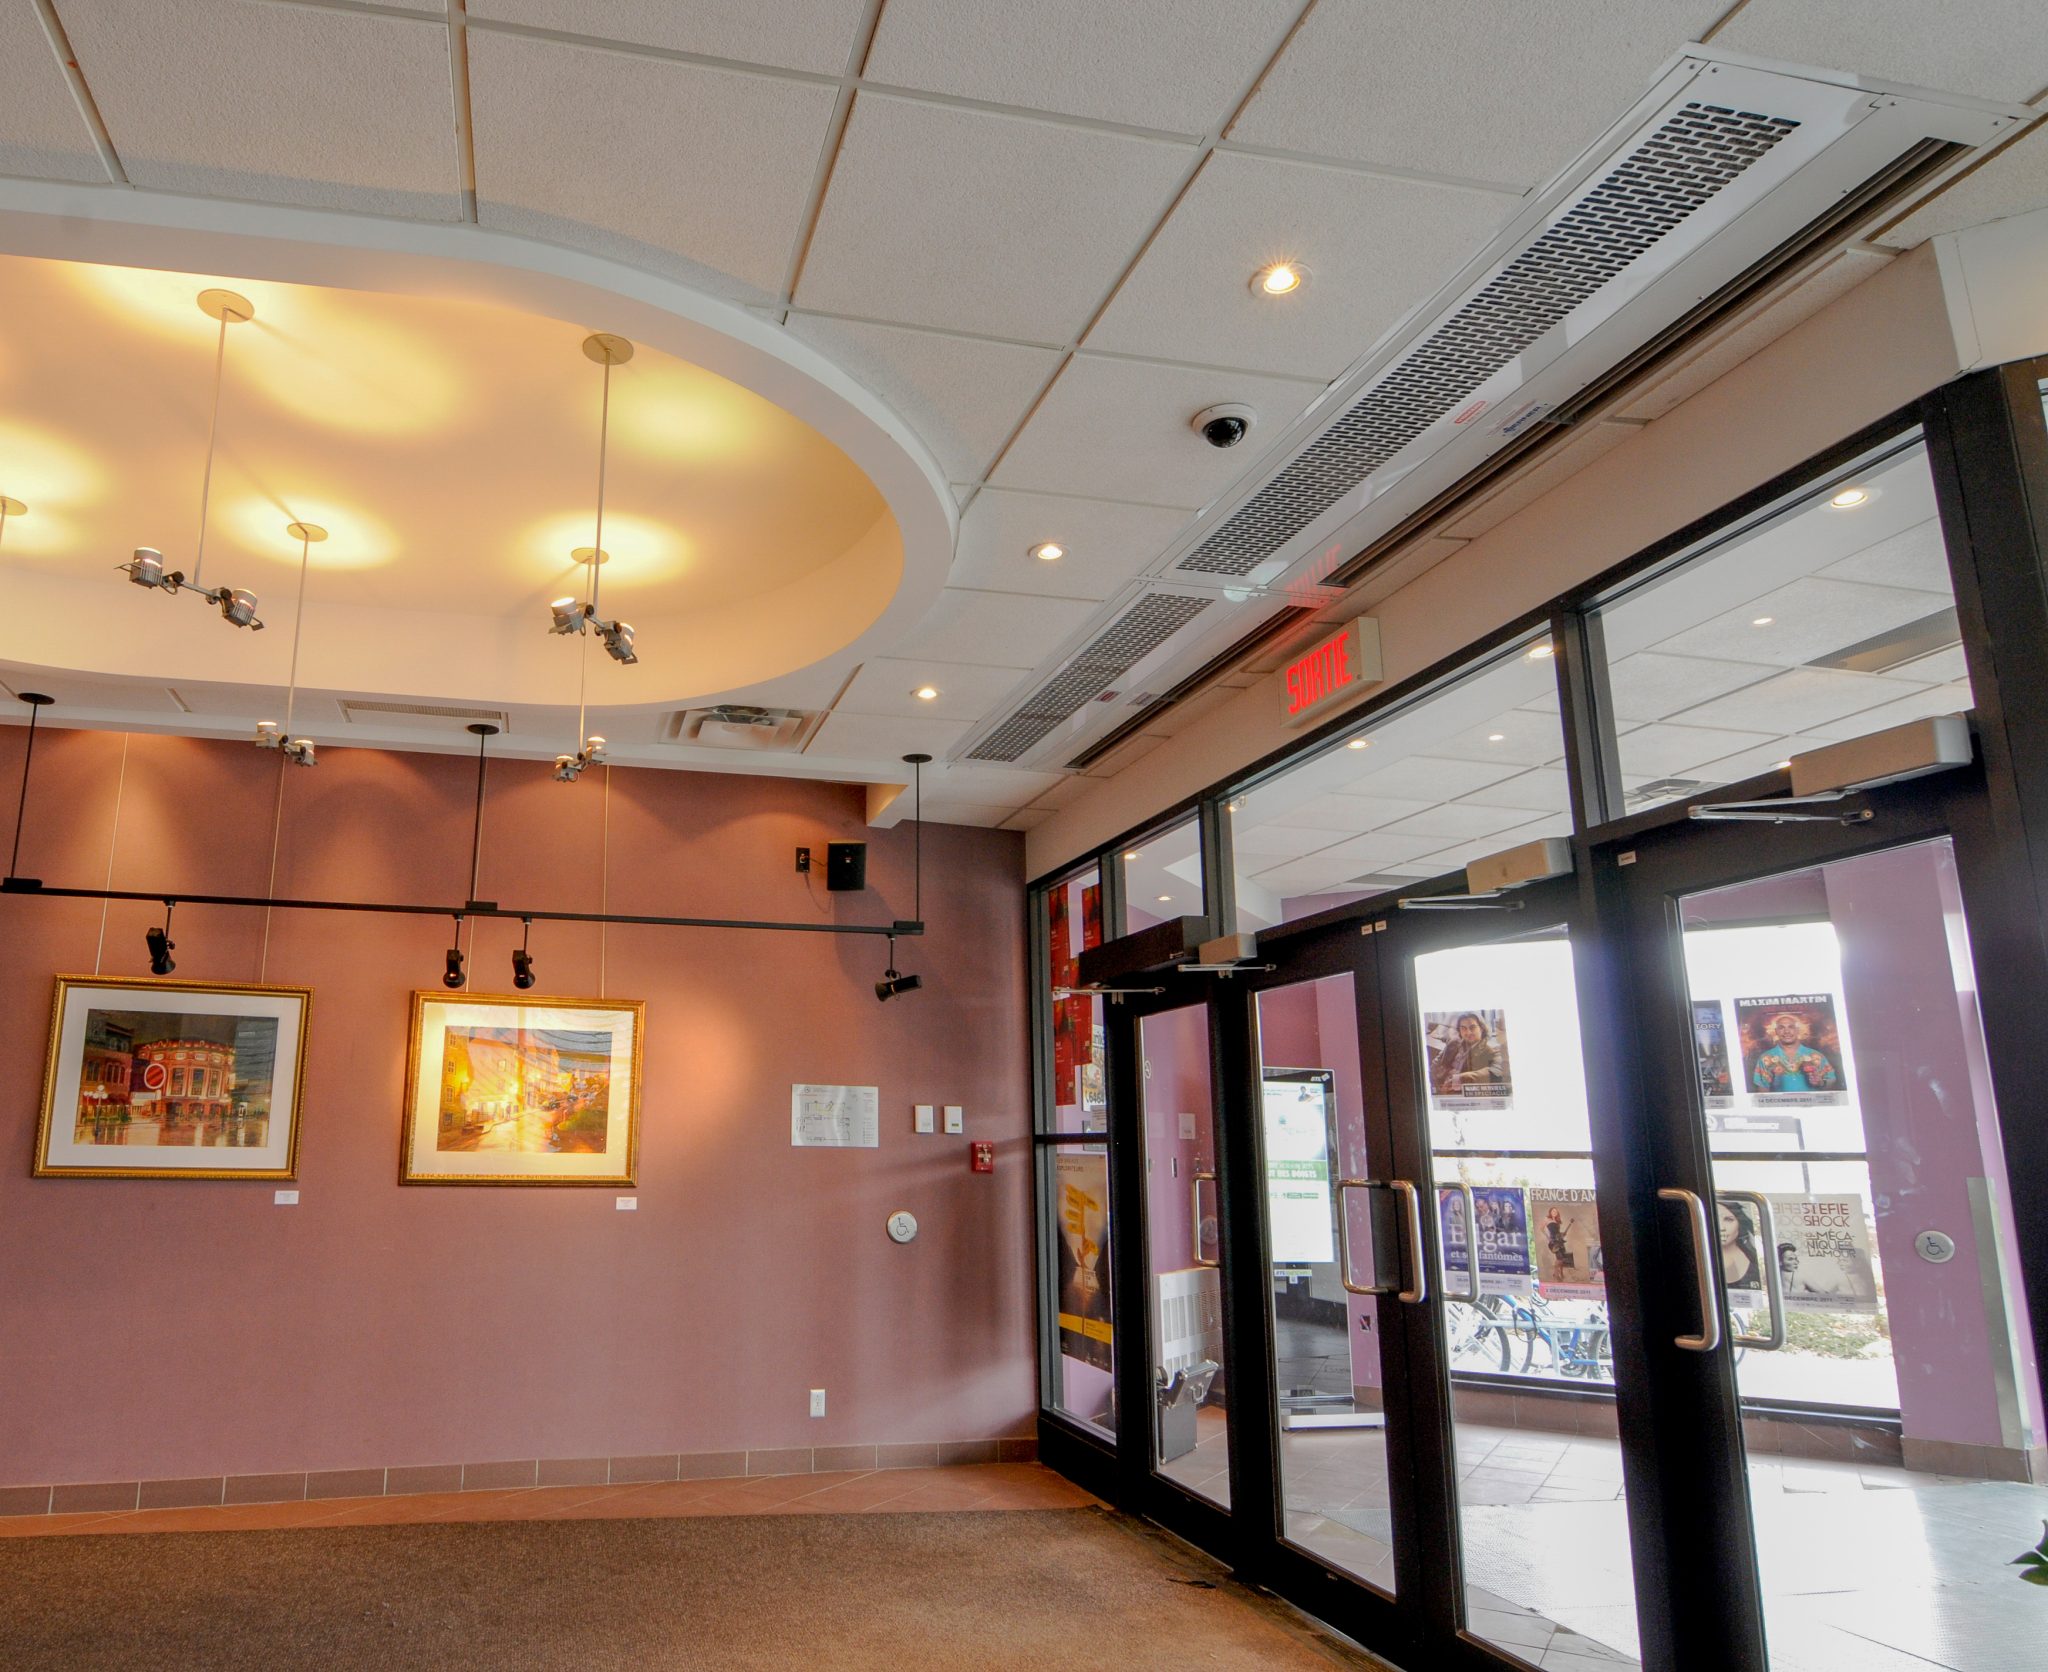 Berner's In-Ceiling Mount/Architectural Receseed air curtains over main entrance.